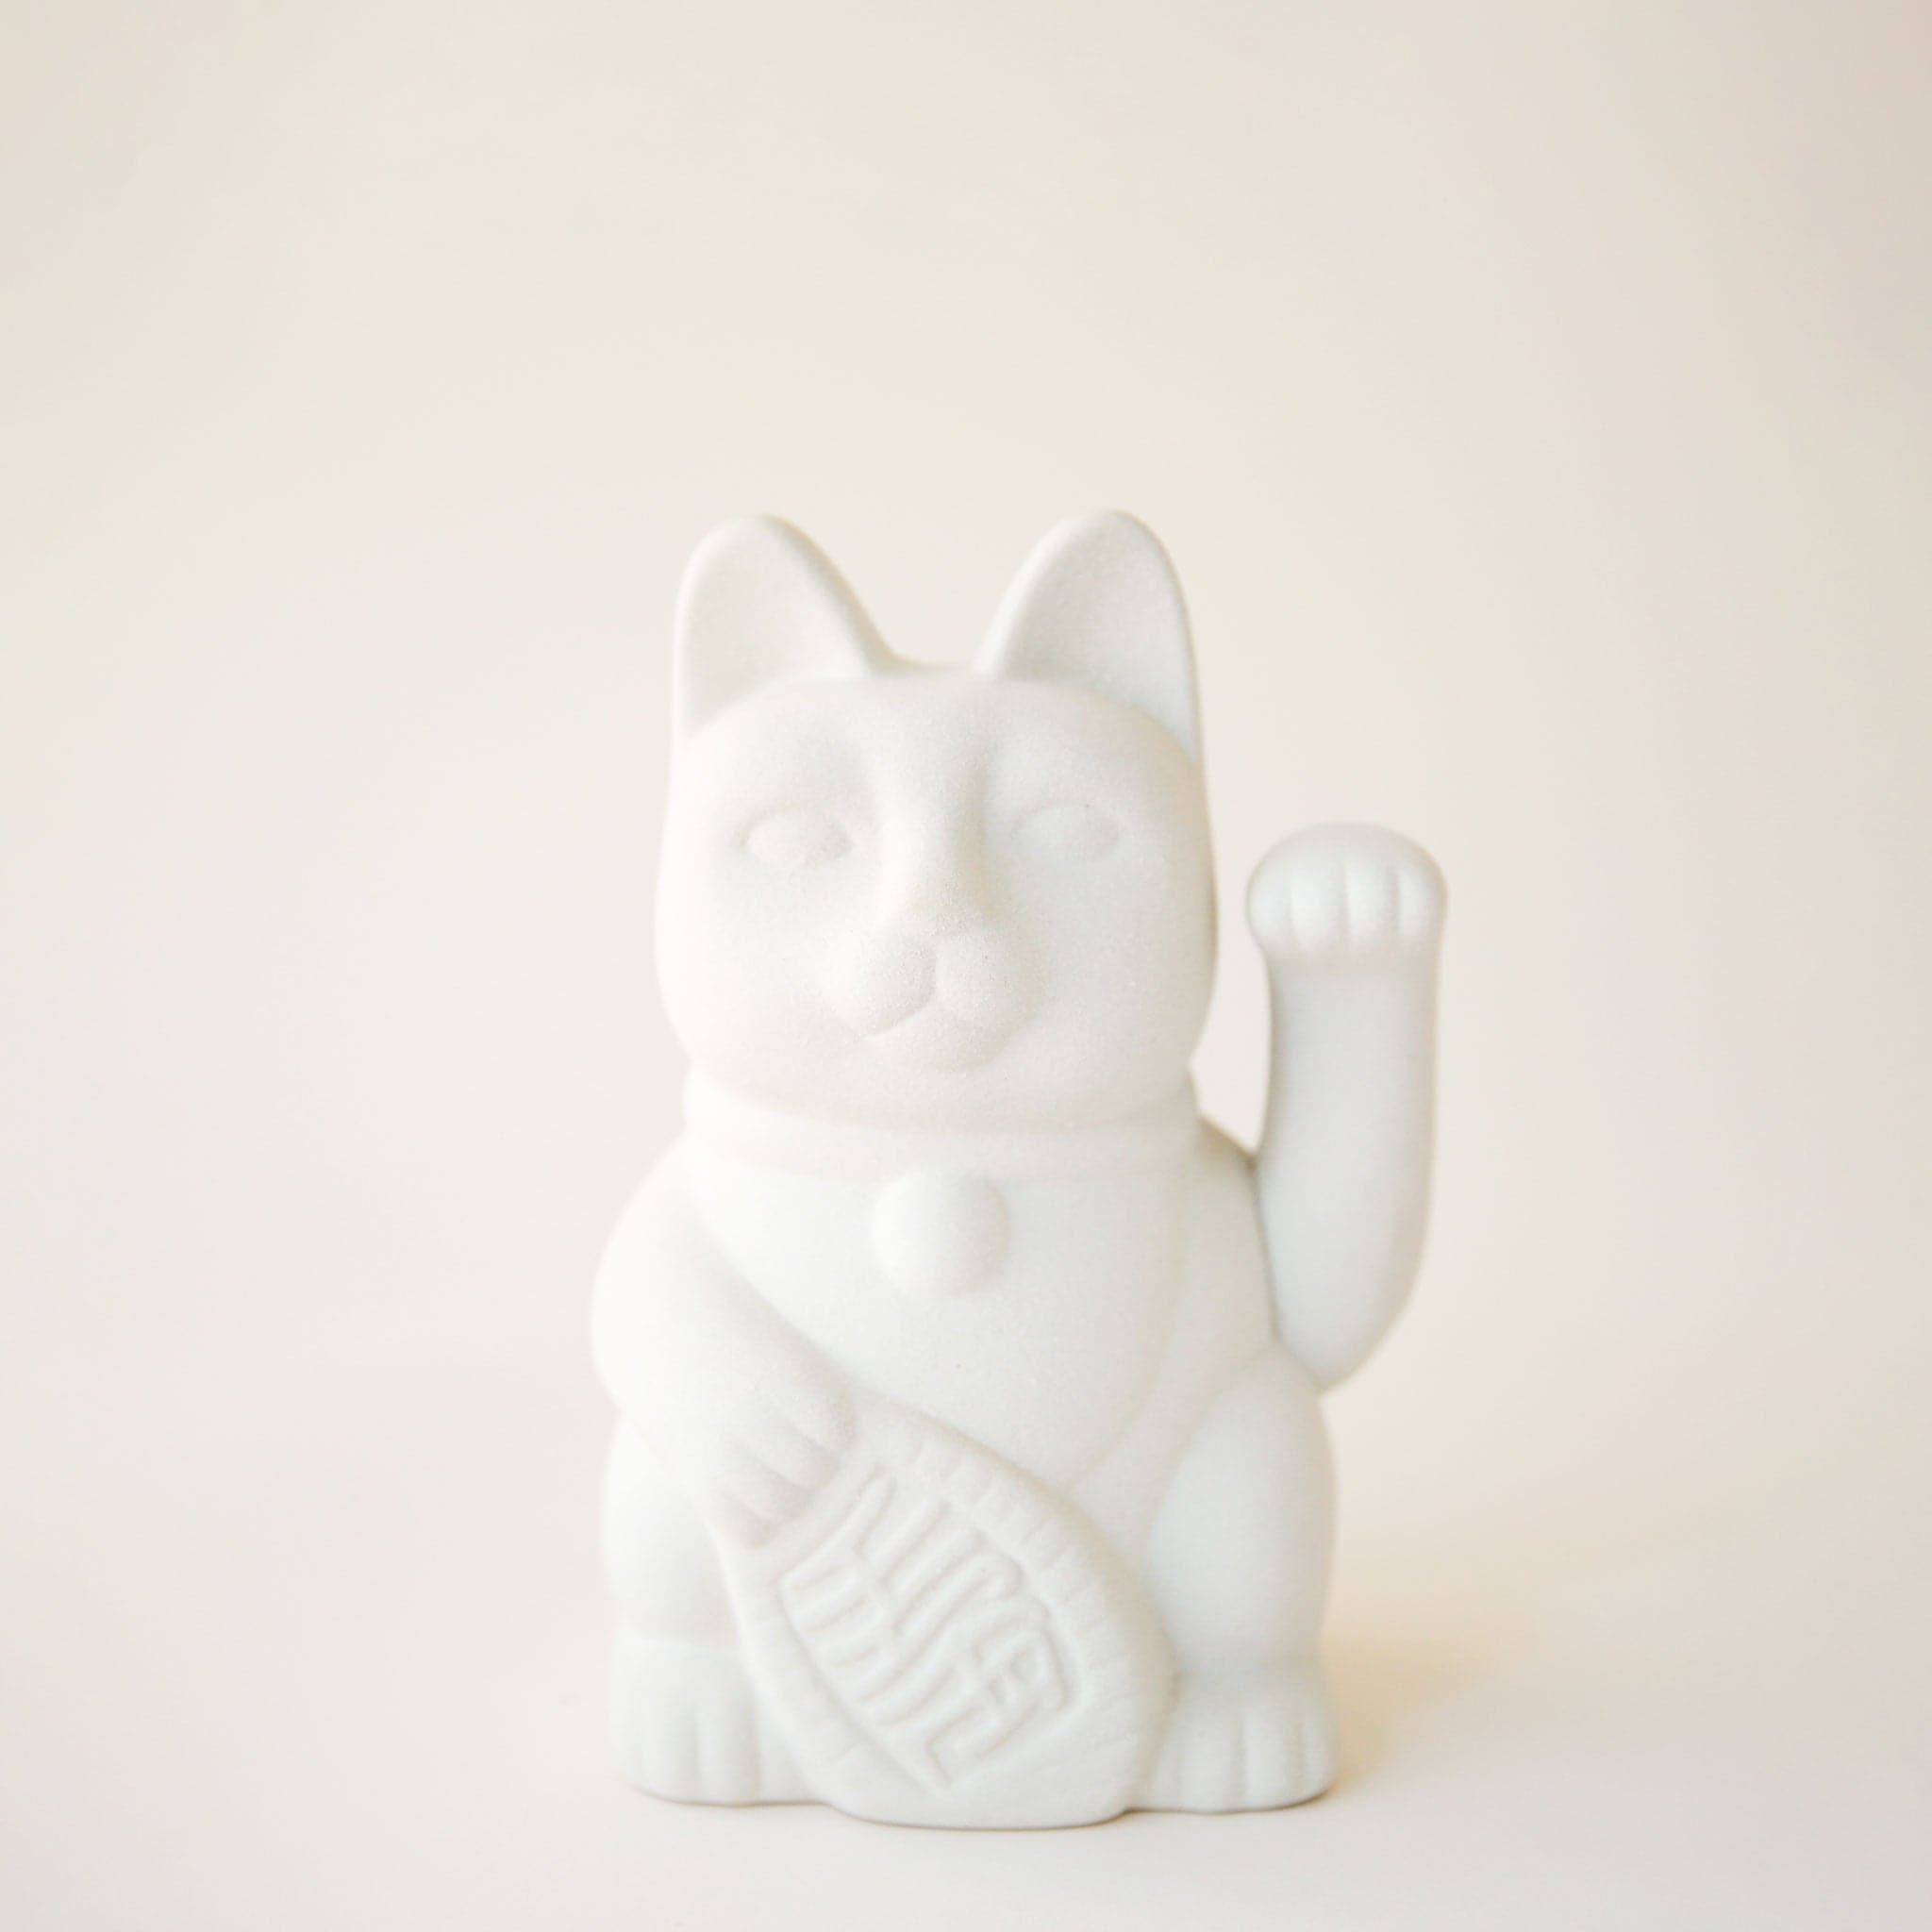 A ceramic lucky cat vase in white with its paw up in the waving position.